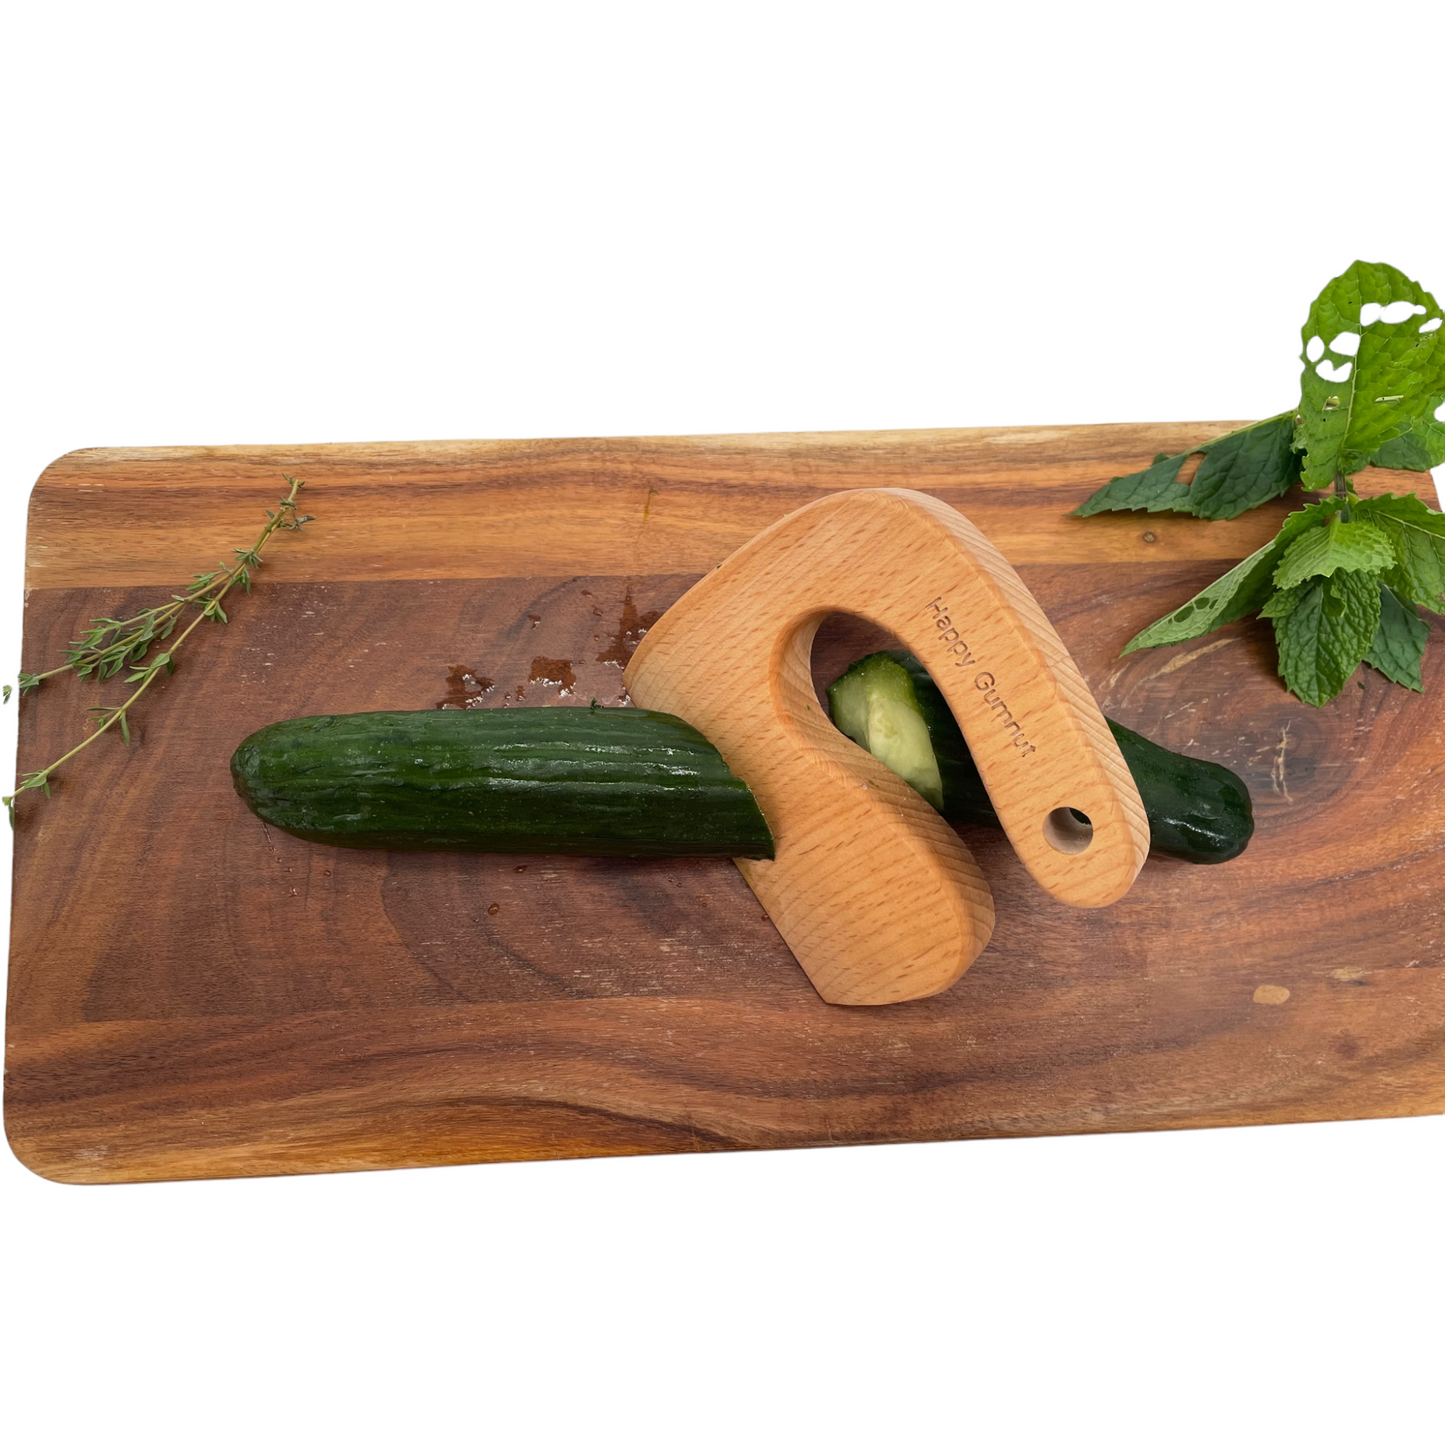 Wooden Cutting Knife Kids Safe Handmade with Natural Wood. - HAPPY GUMNUT